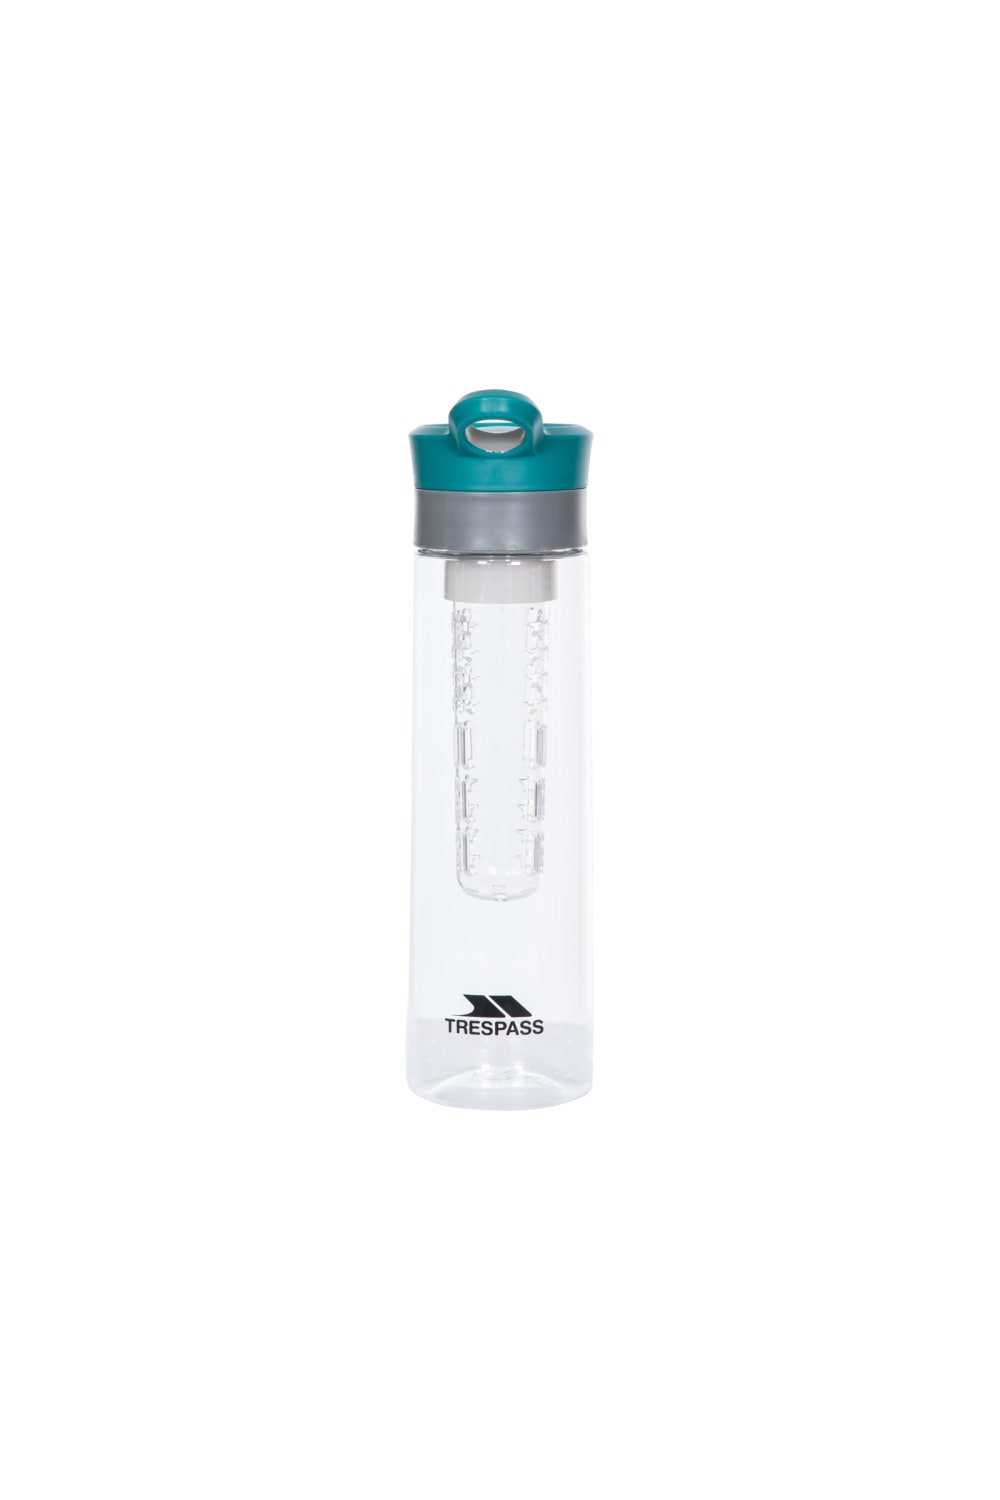 Trespass Infuser Fusion Bottle (Teal) (One Size)